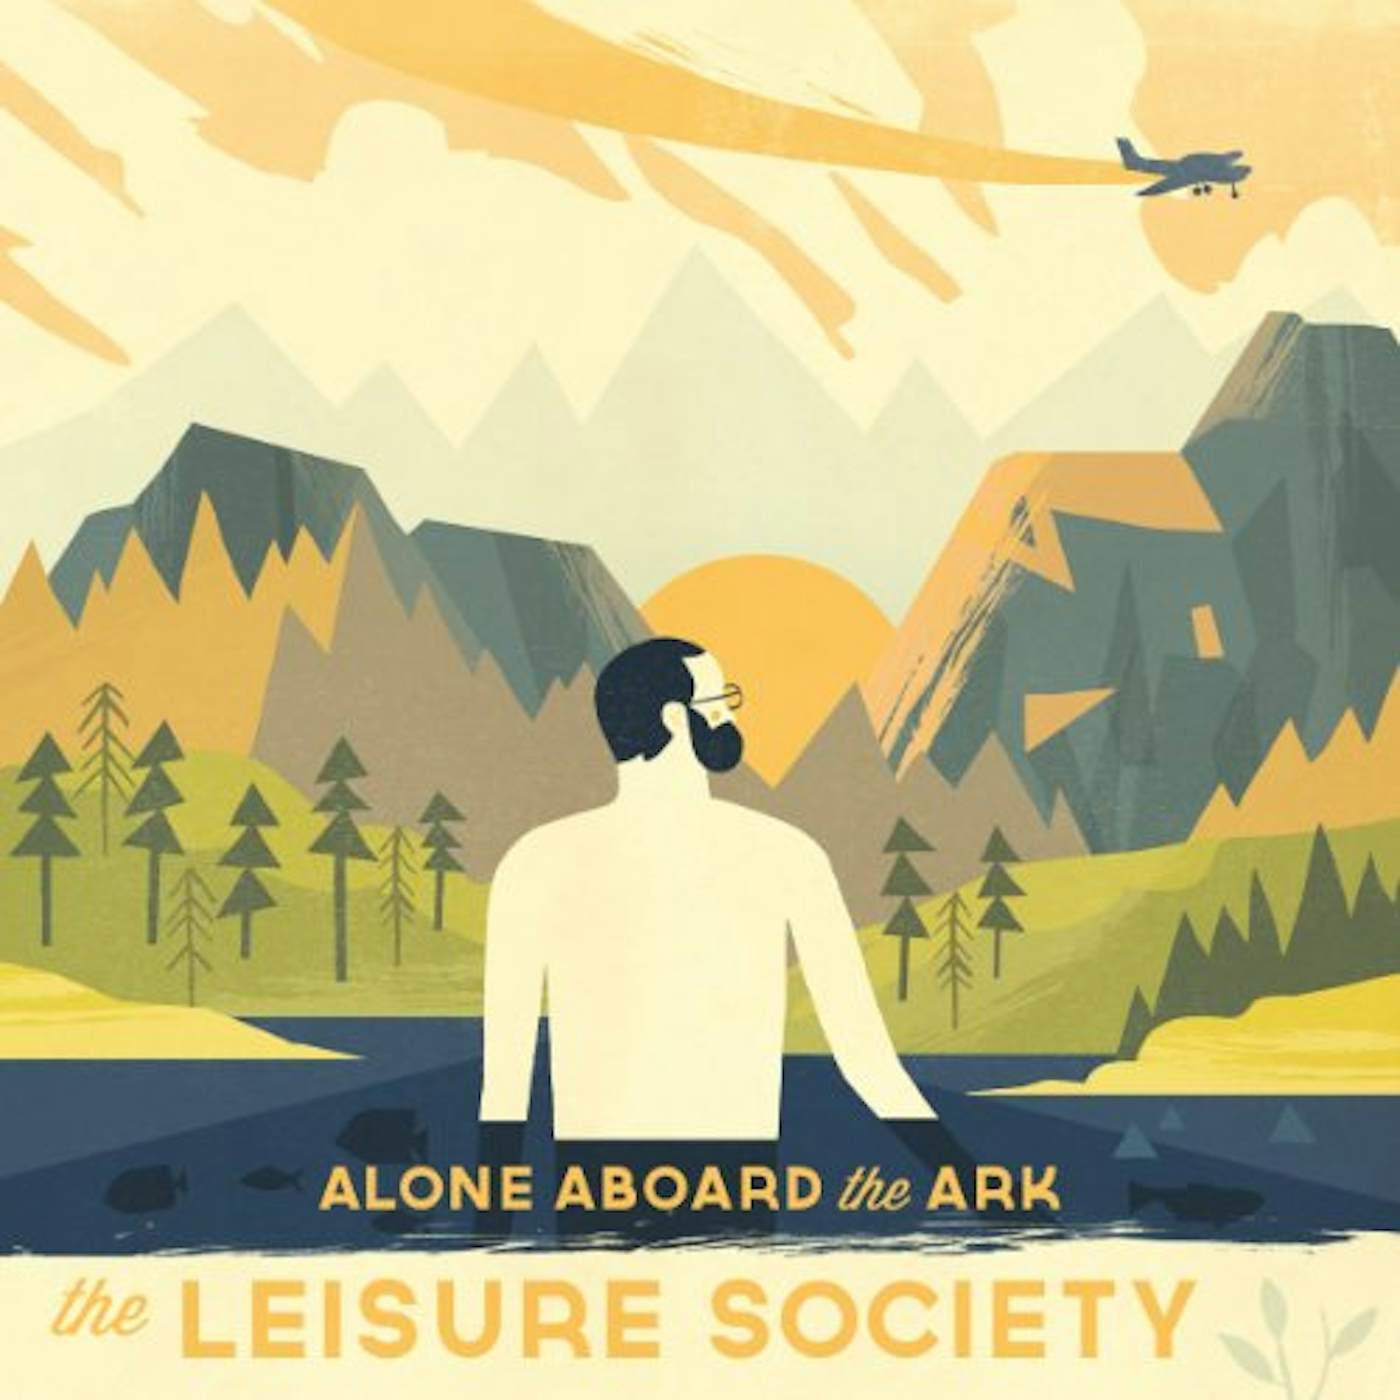 The Leisure Society Alone Aboard the Ark Vinyl Record